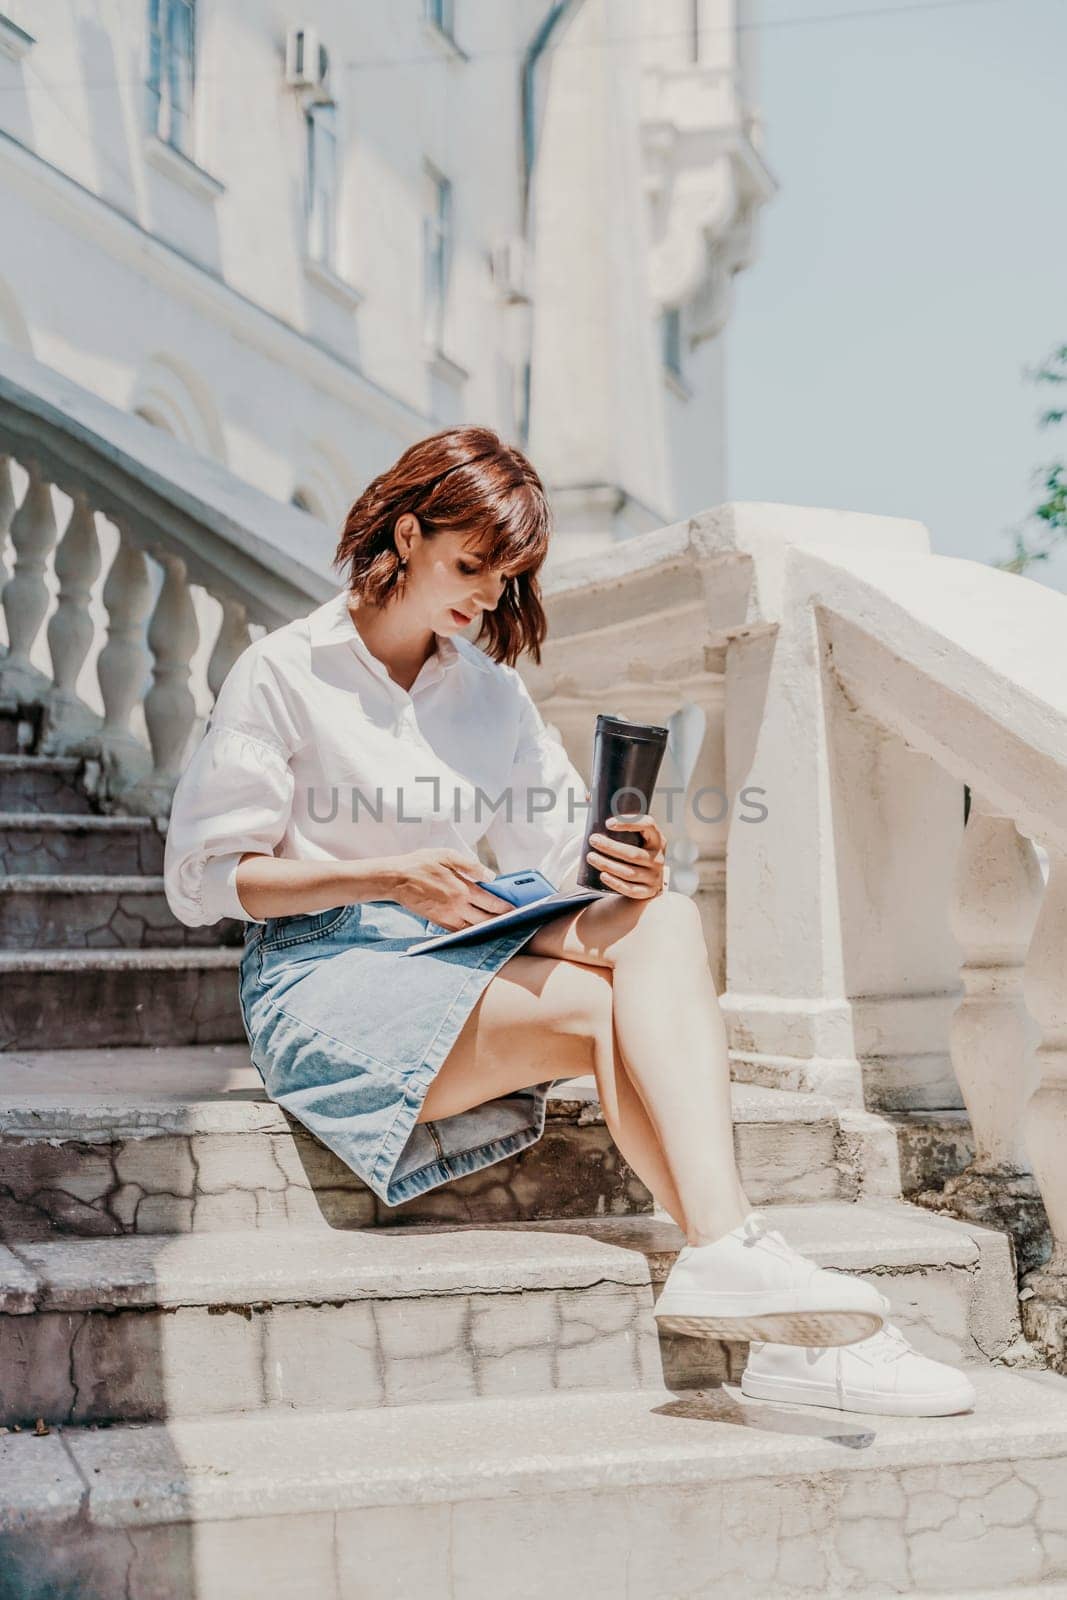 Freelancer woman phone. A business woman in a white shirt and denim skirt sits on the steps near an ancient building in the city and looks into the phone.